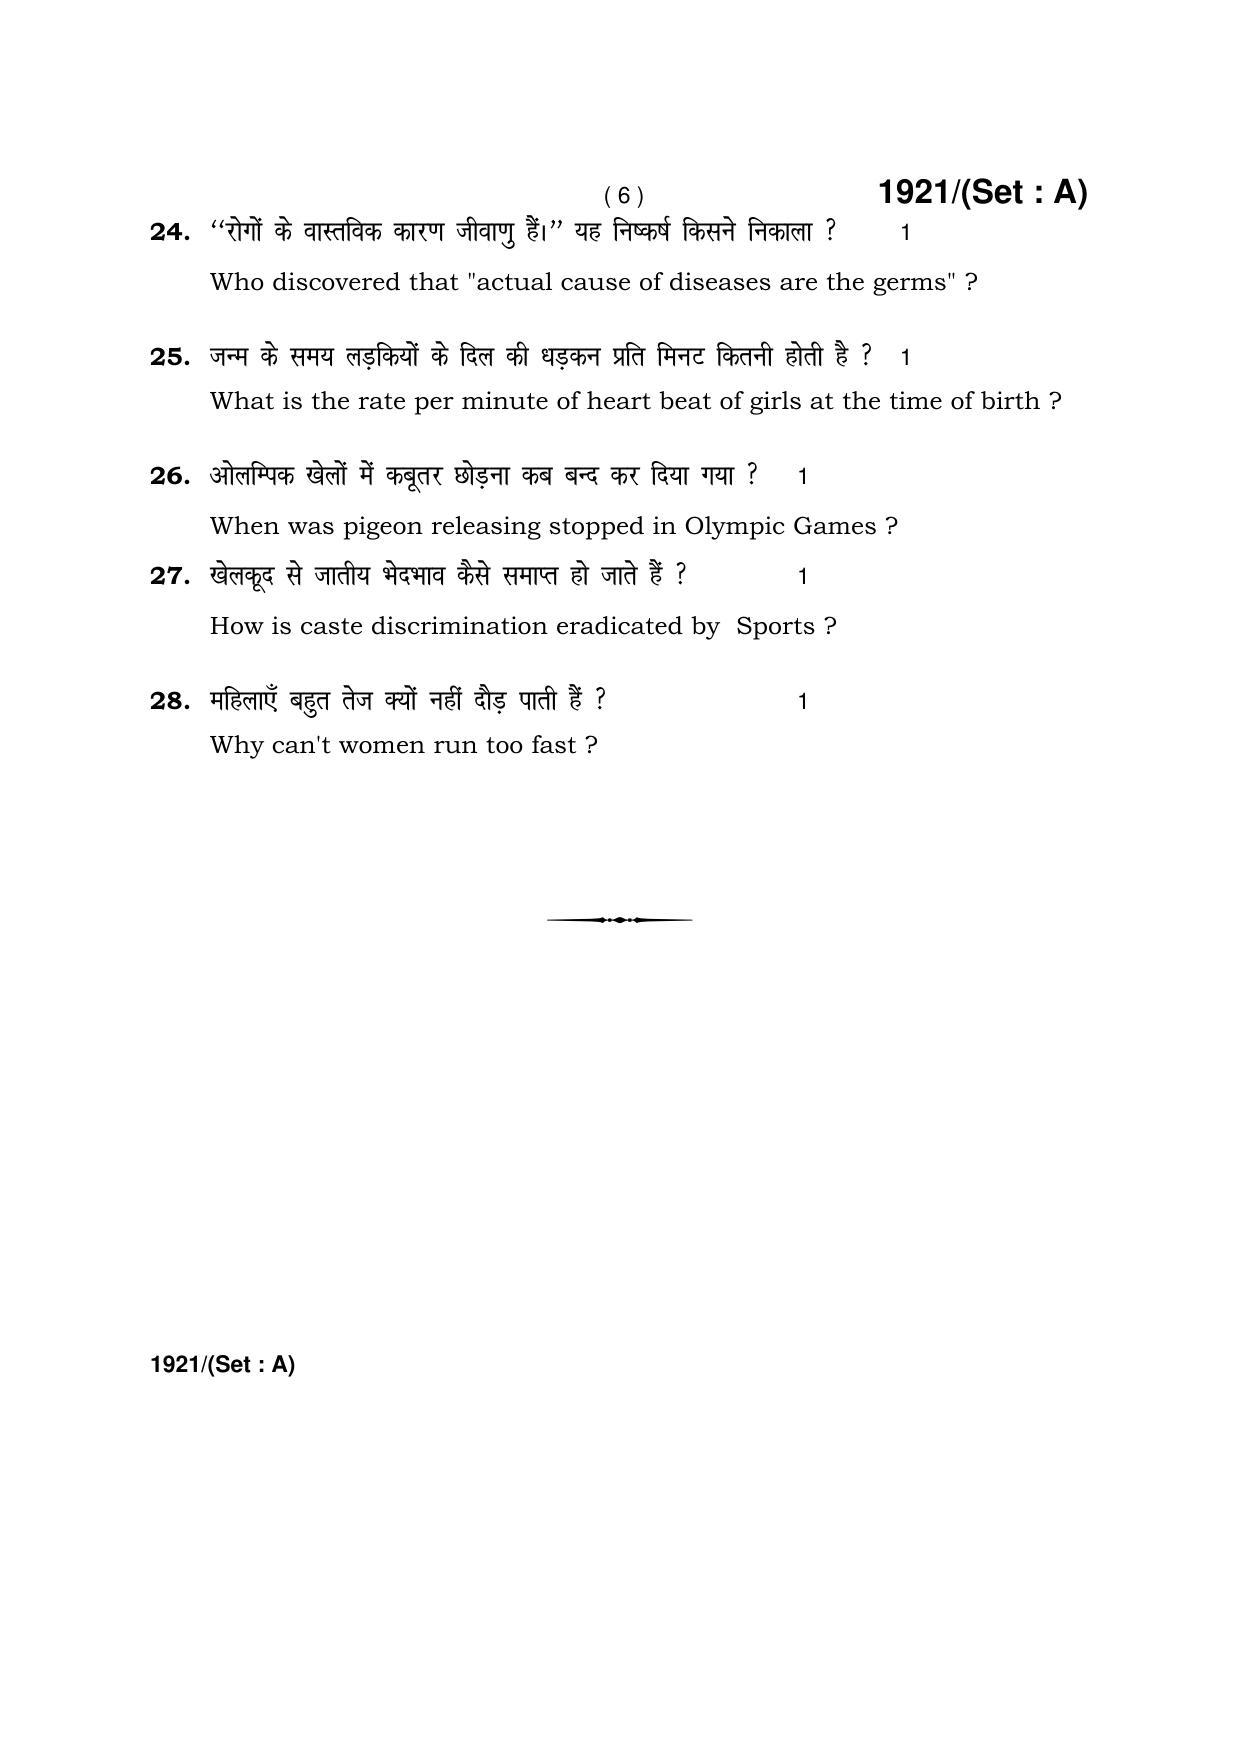 Haryana Board HBSE Class 10 Health & Physical Education -A 2017 Question Paper - Page 6